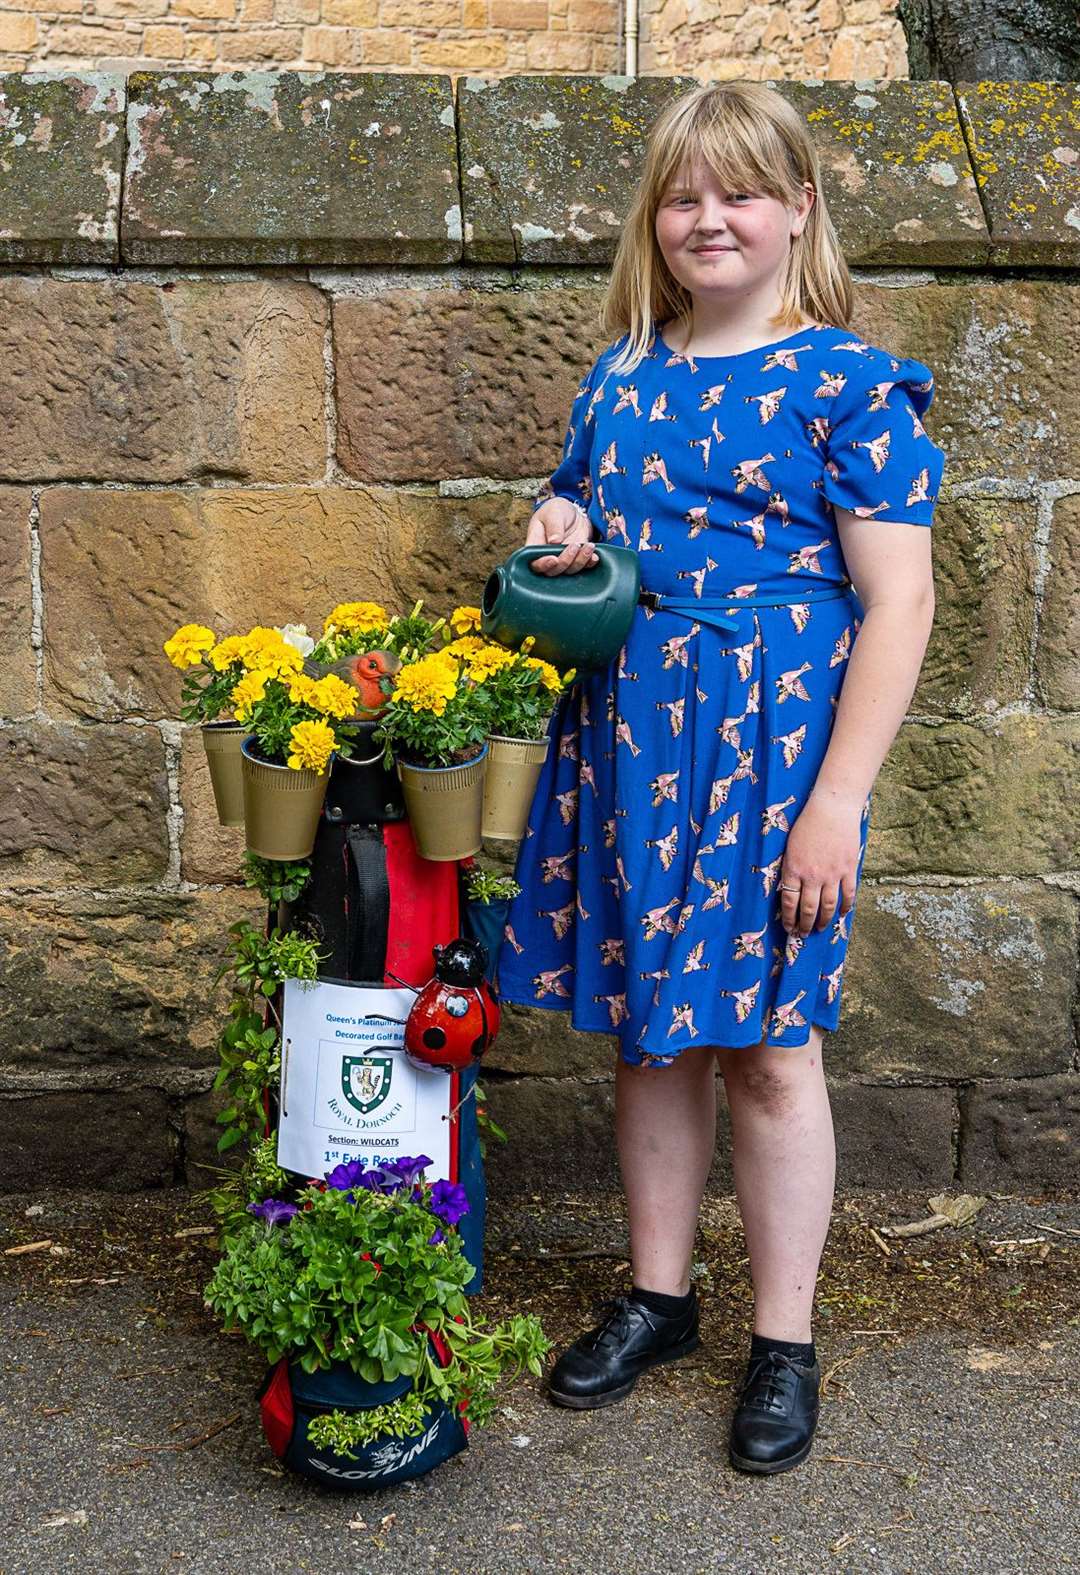 Evie Ross was the winner of the Wildcats section of the Royal Dornoch Golf Club Decorated Golf Club Bag competition. Picture: Andy Kirby